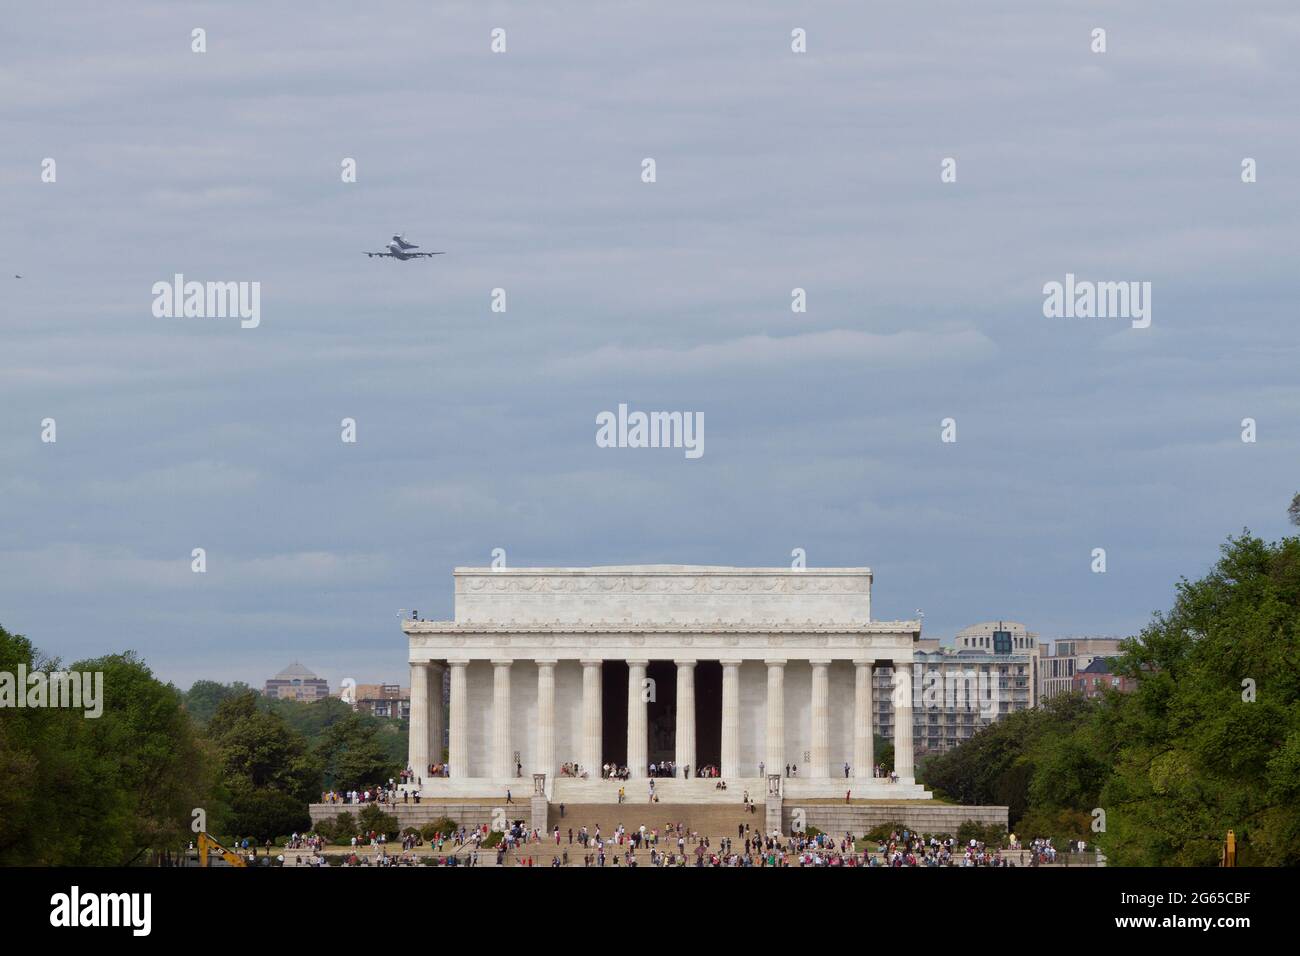 The space shuttle Discovery flies over the Lincoln Memorial during its final flight. Stock Photo